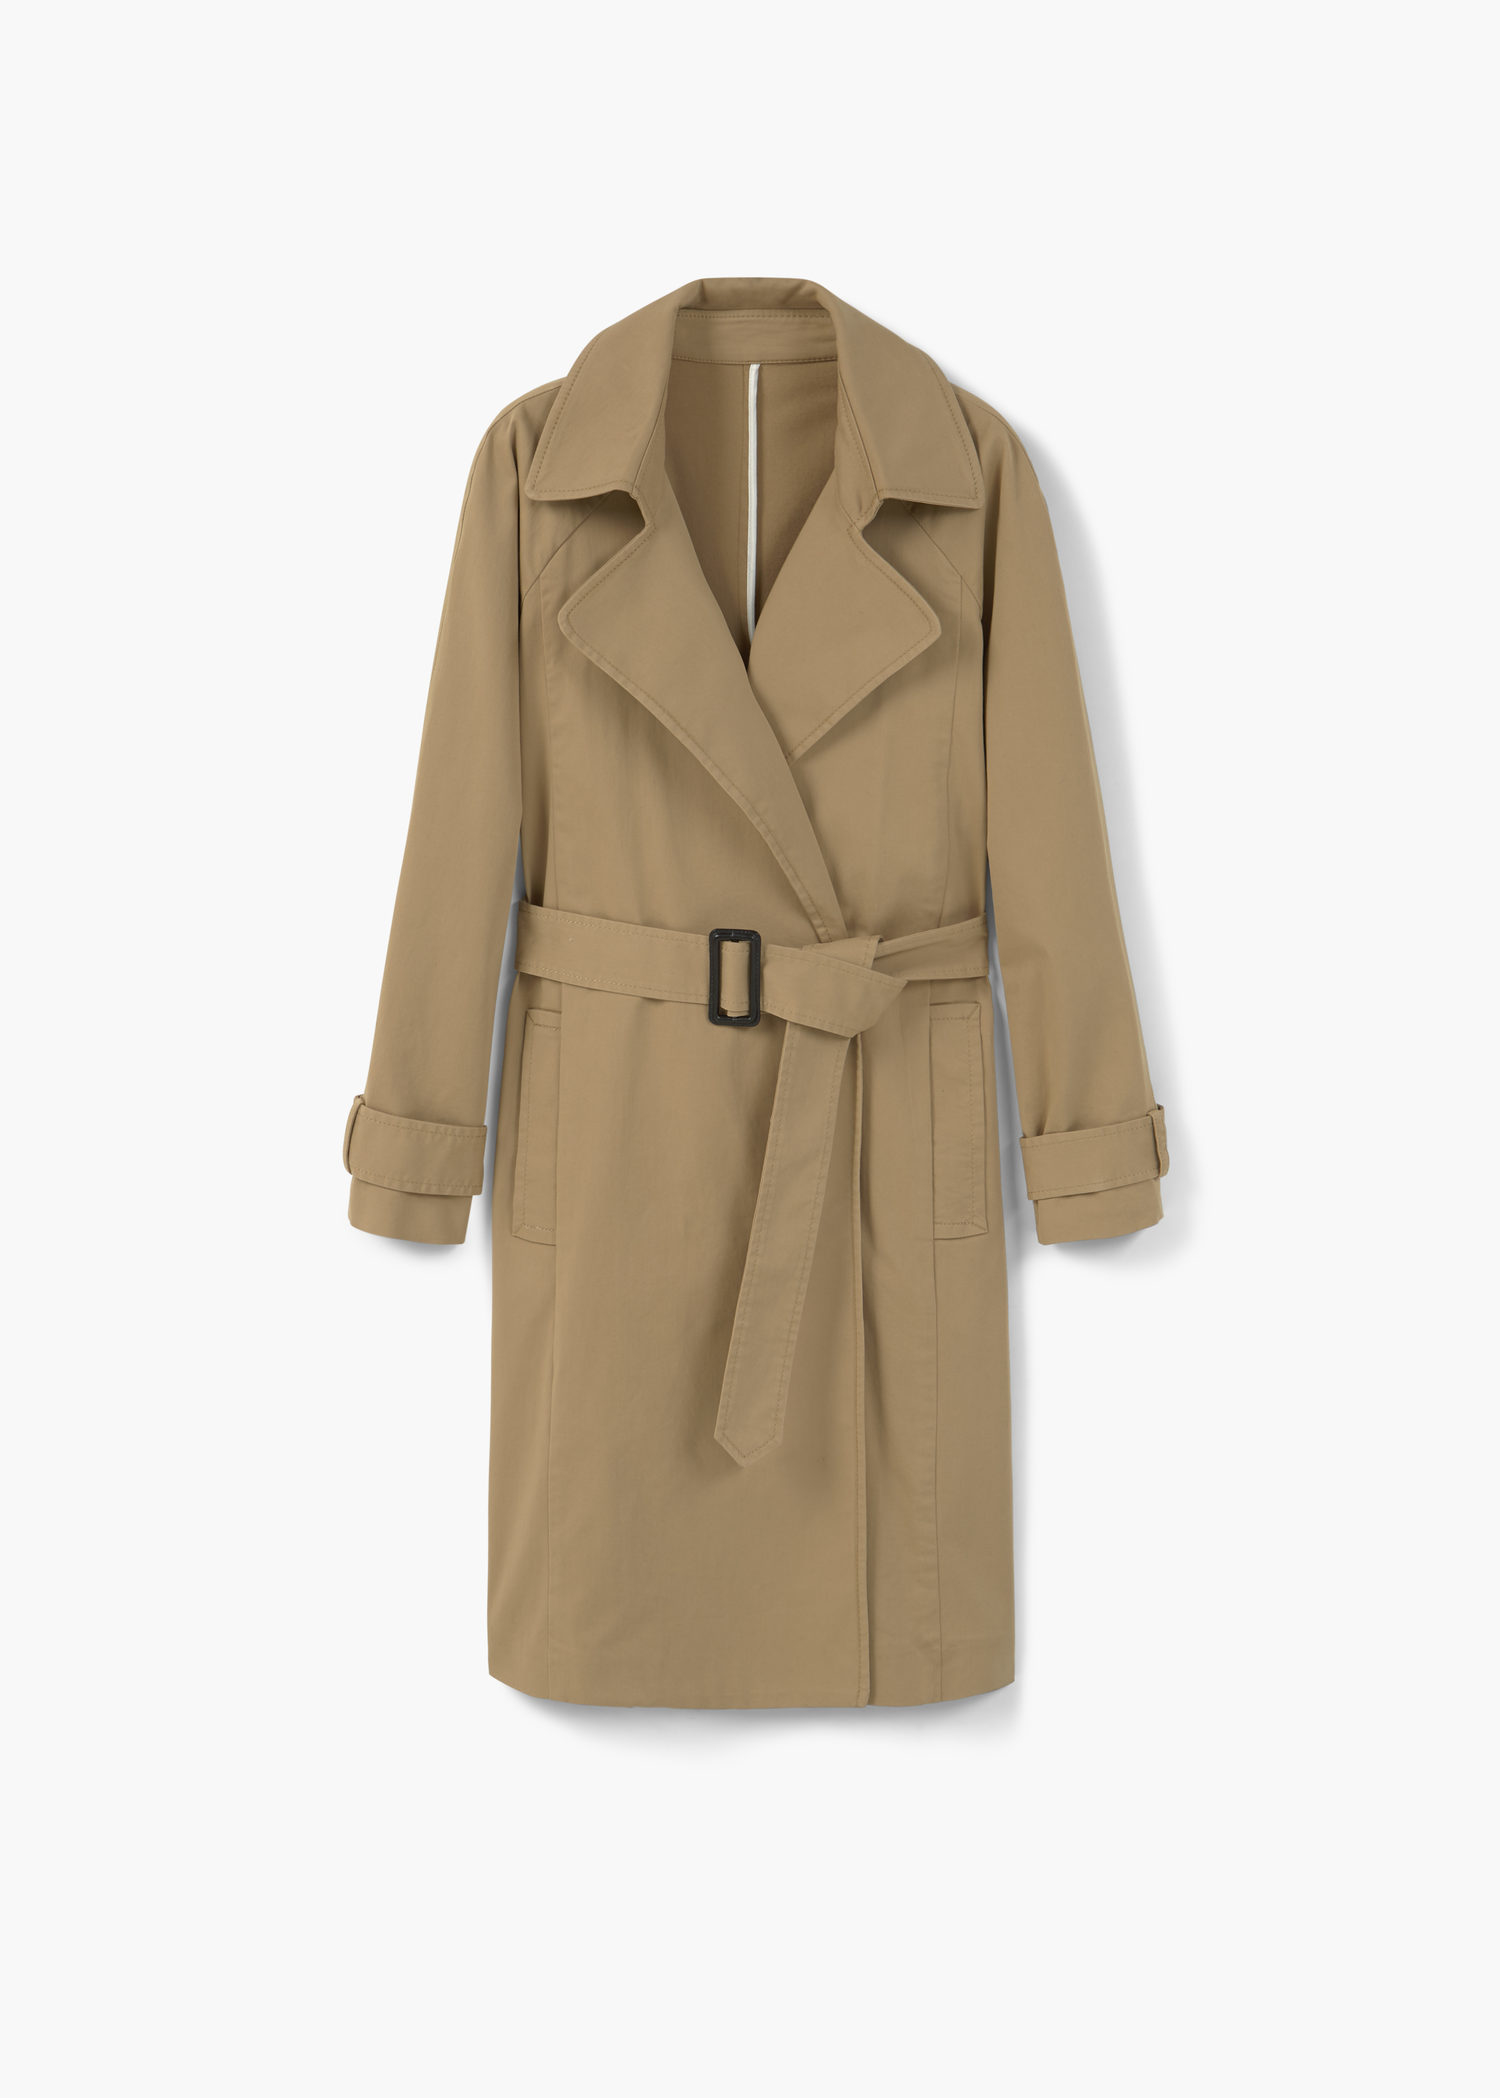 Lyst - Mango Classic Cotton Trench Coat in Natural